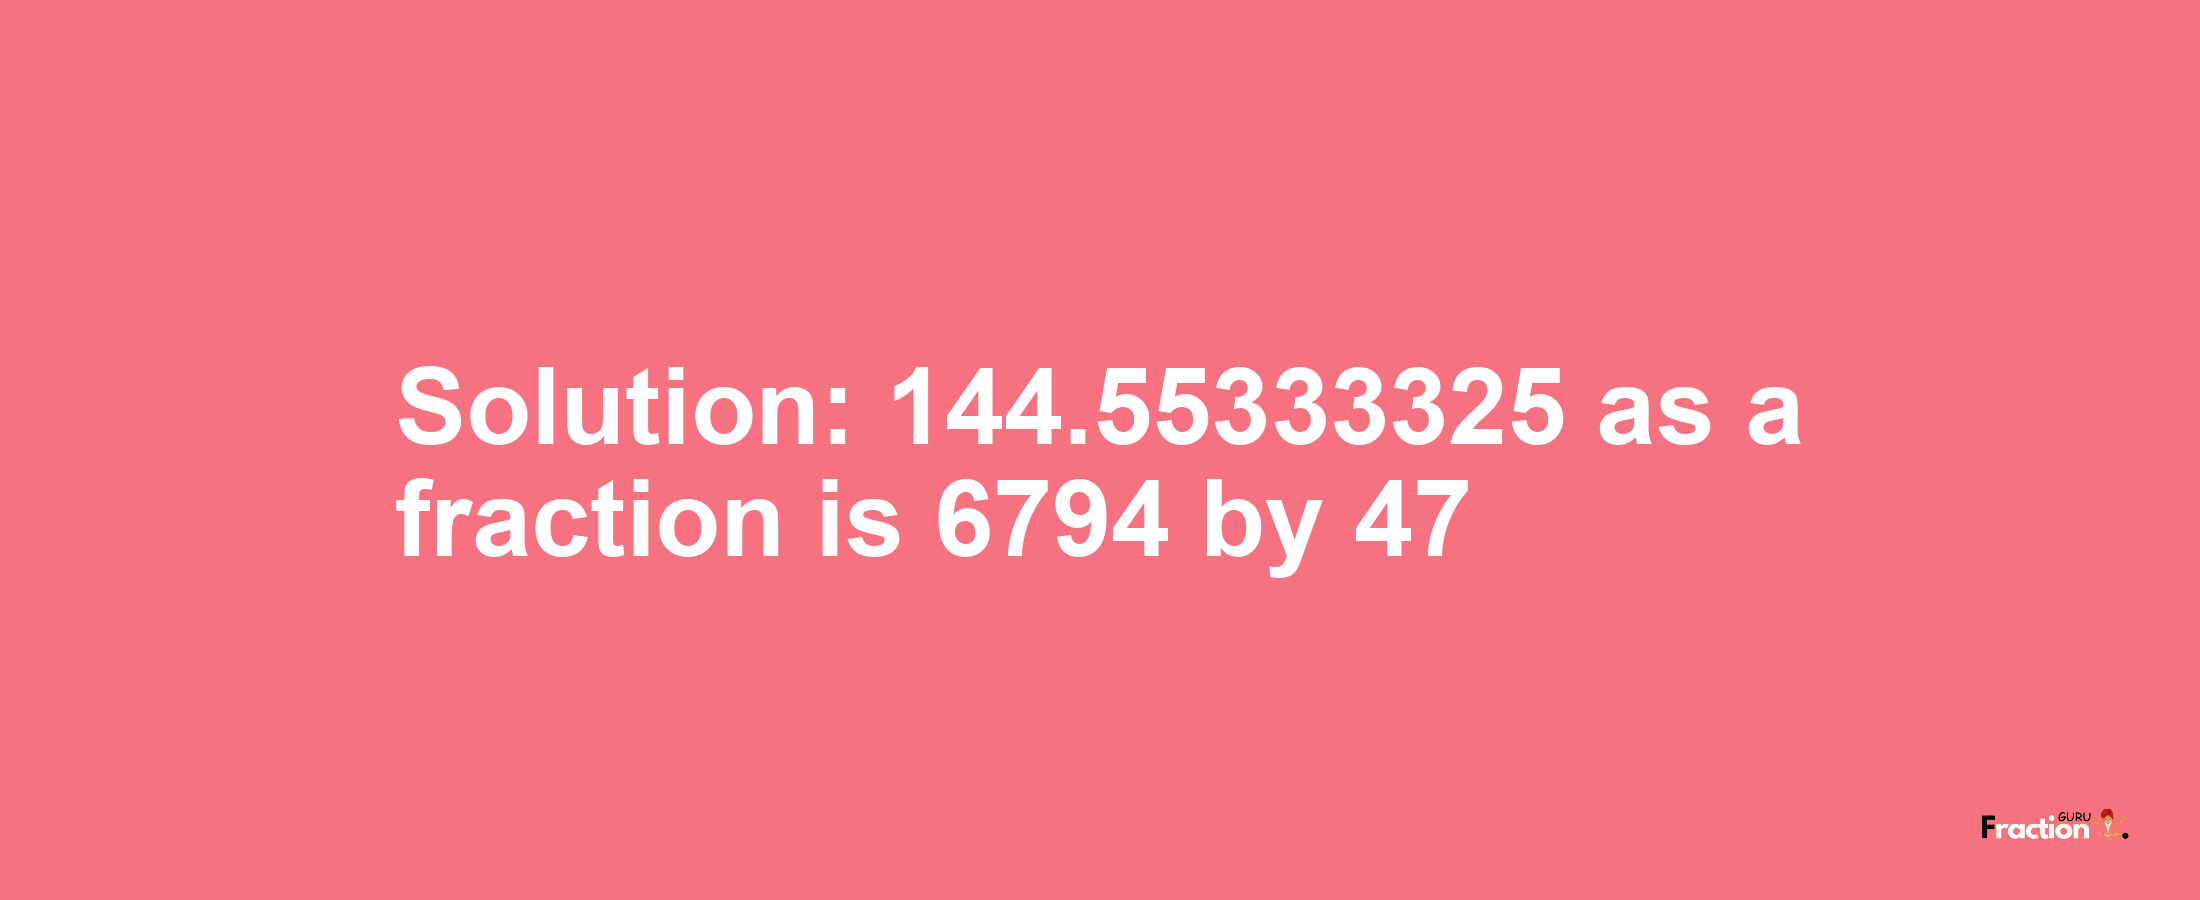 Solution:144.55333325 as a fraction is 6794/47